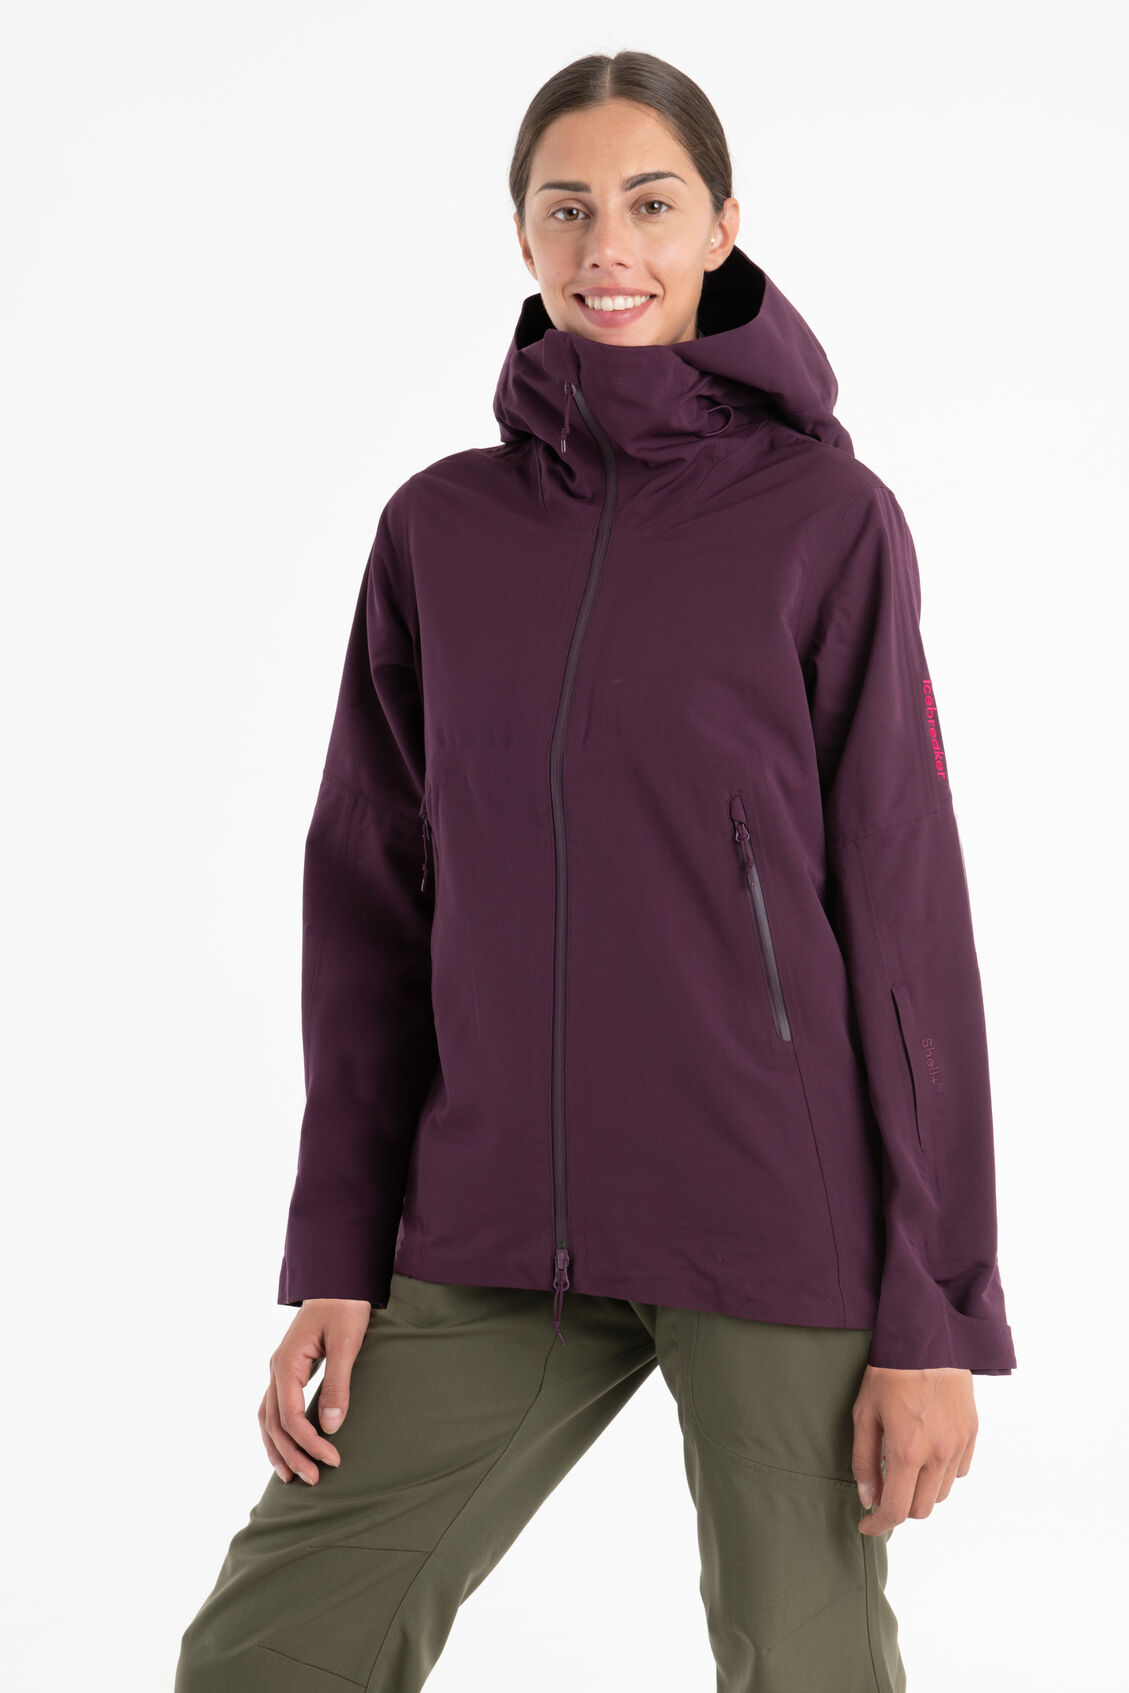 Womens Shell+™ Merino Peak Hooded Jacket An innovative technical shell made with 100% merino wool, the Shell+™ Peak Hooded Jacket provides ample protection and freedom of movement during any snowy winter adventure.